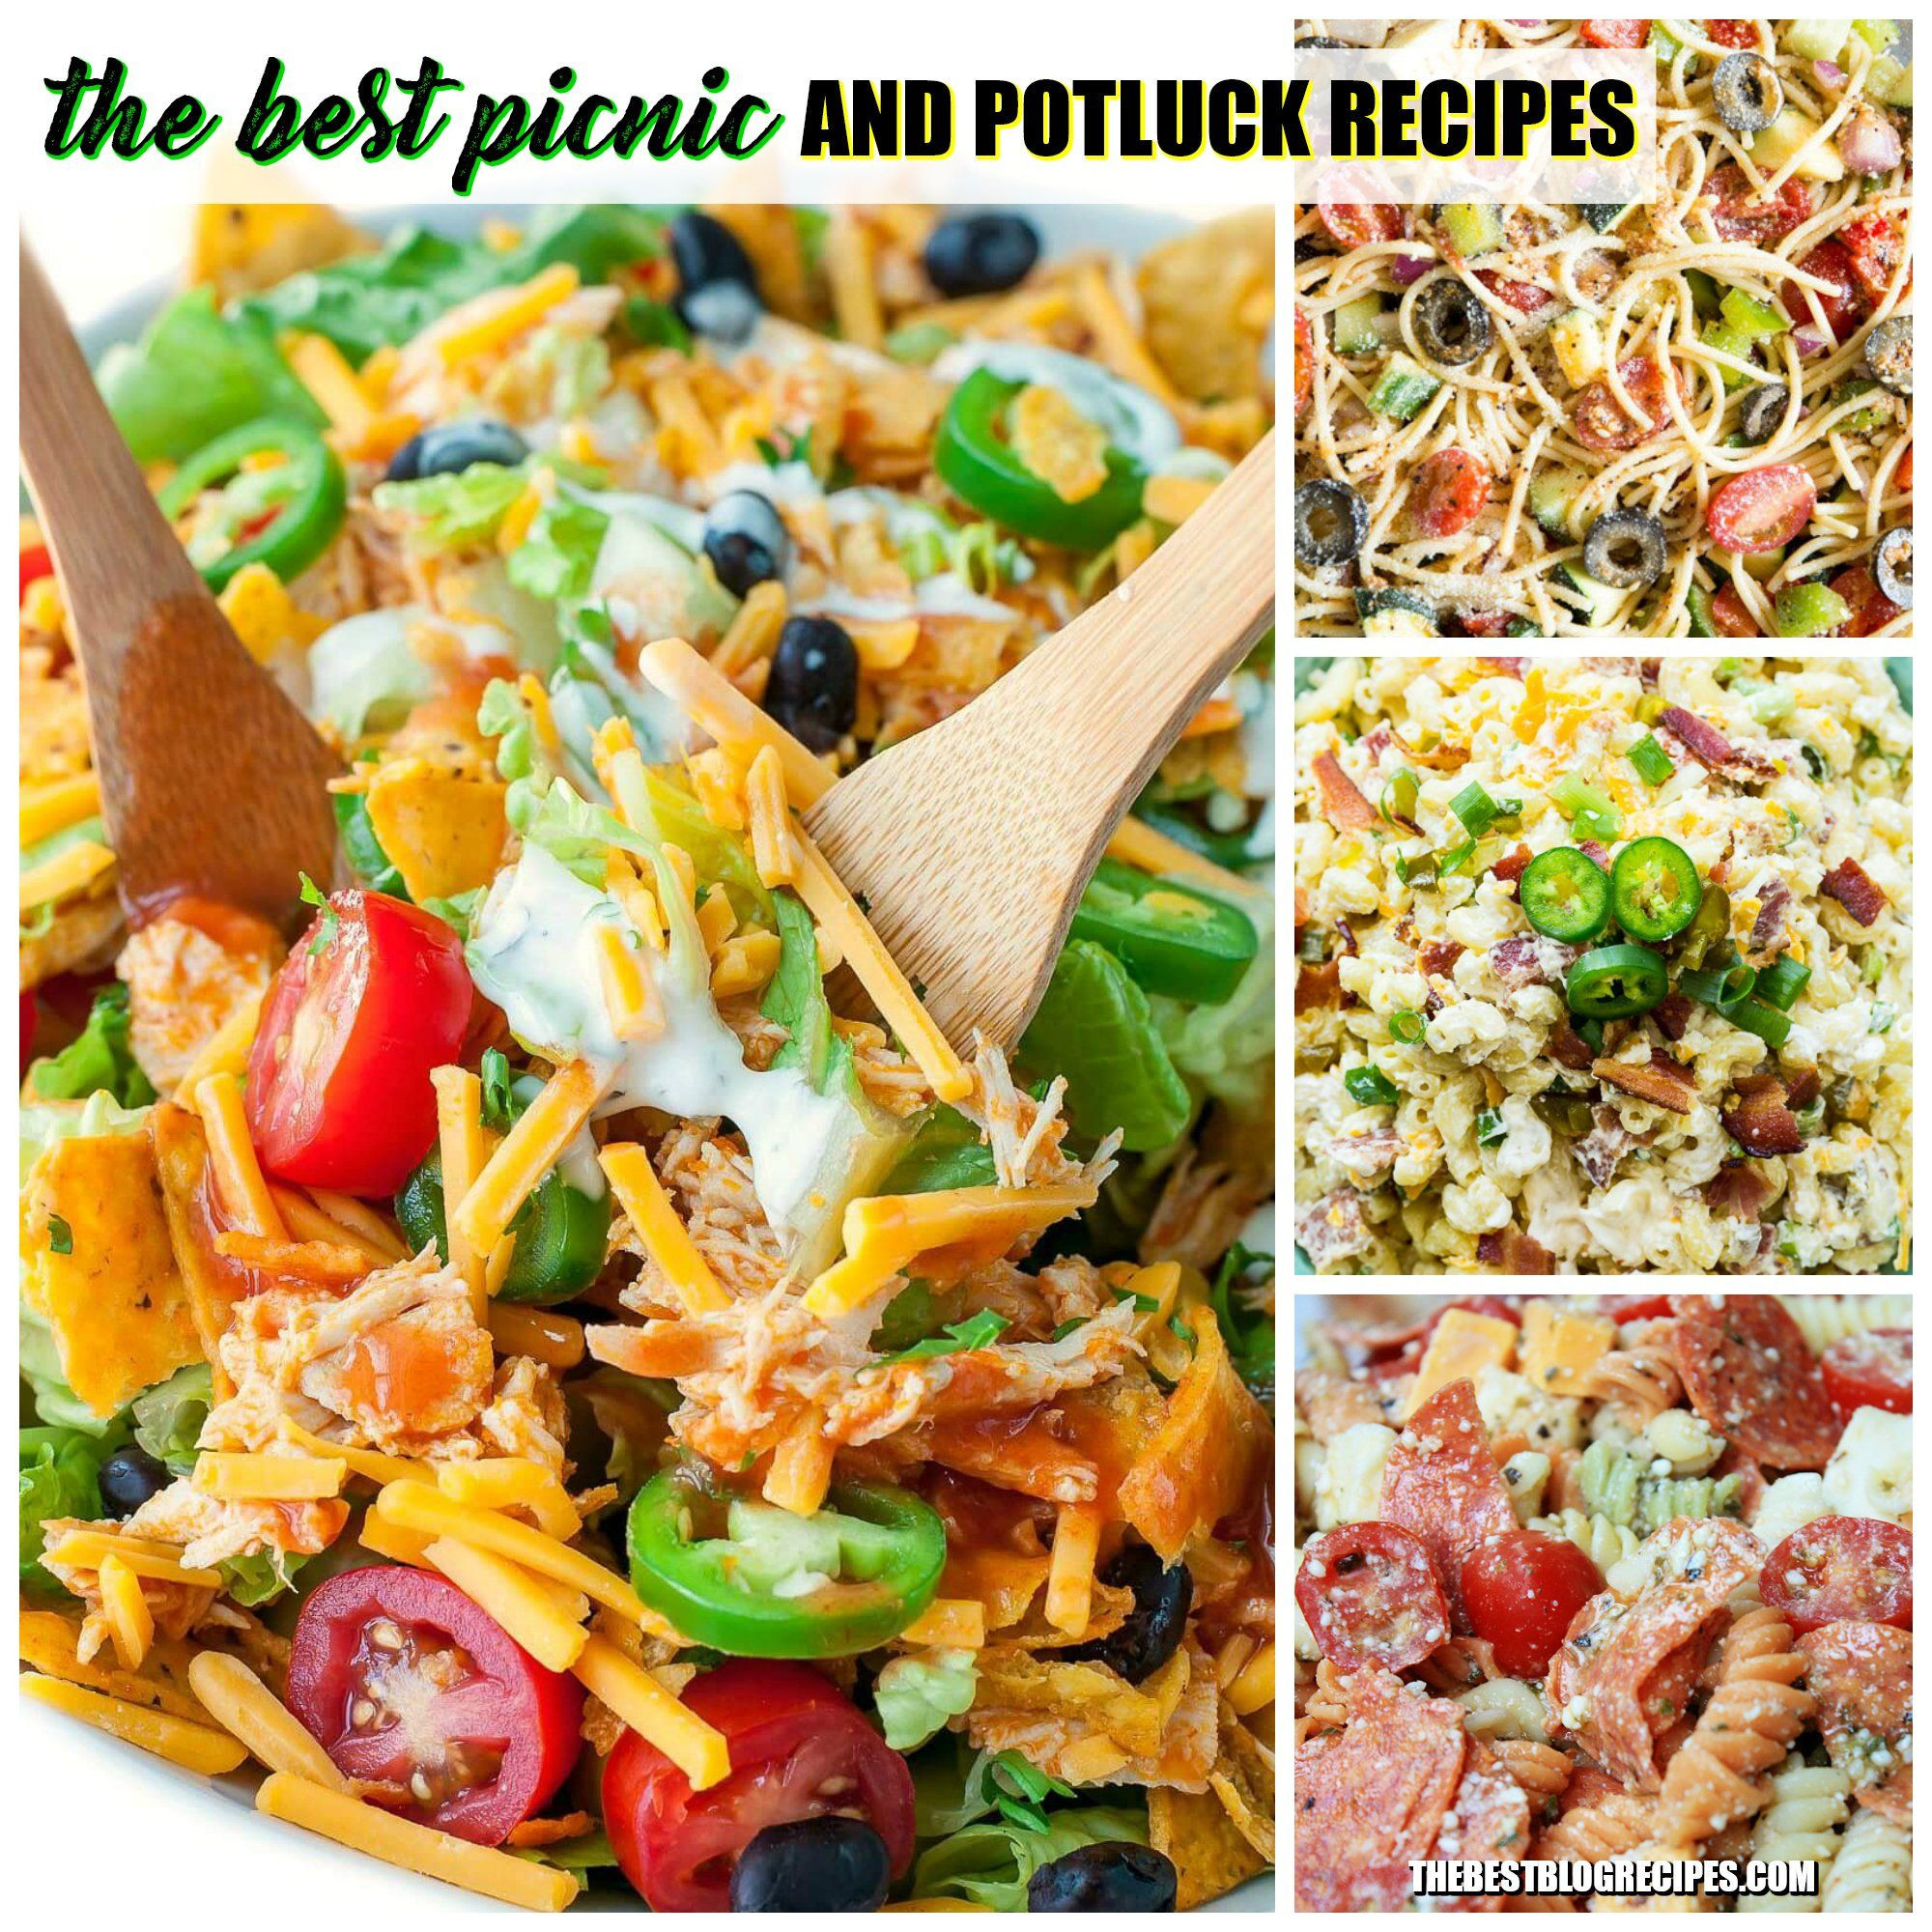 Picnic Main Dishes
 The Best Picnic and Potluck Recipes are made using quick